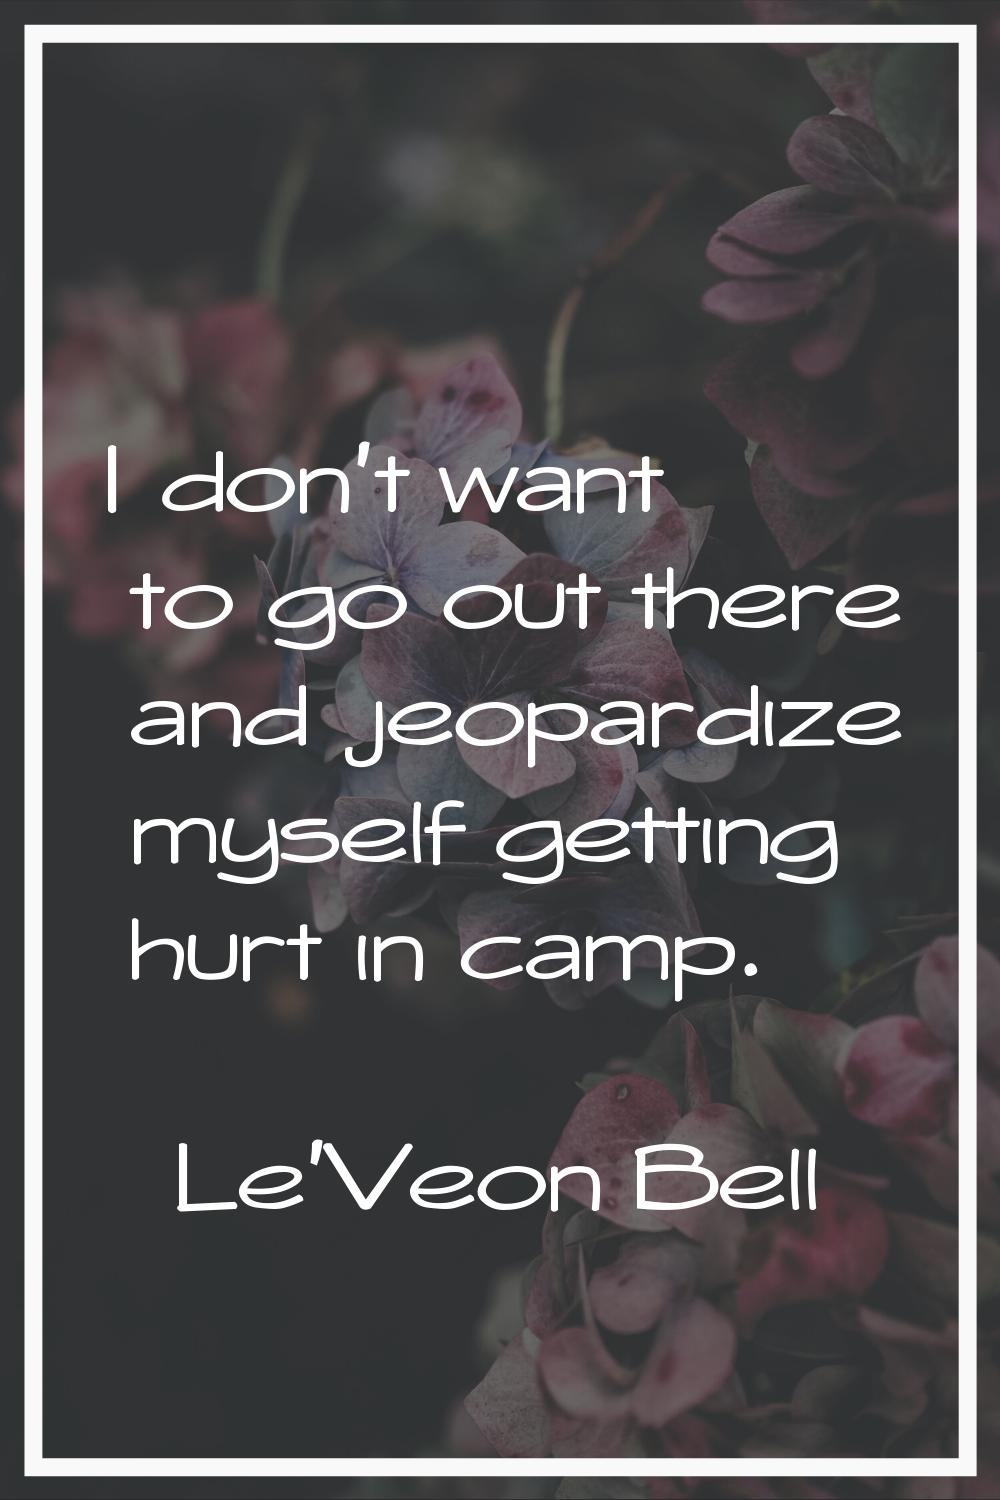 I don't want to go out there and jeopardize myself getting hurt in camp.